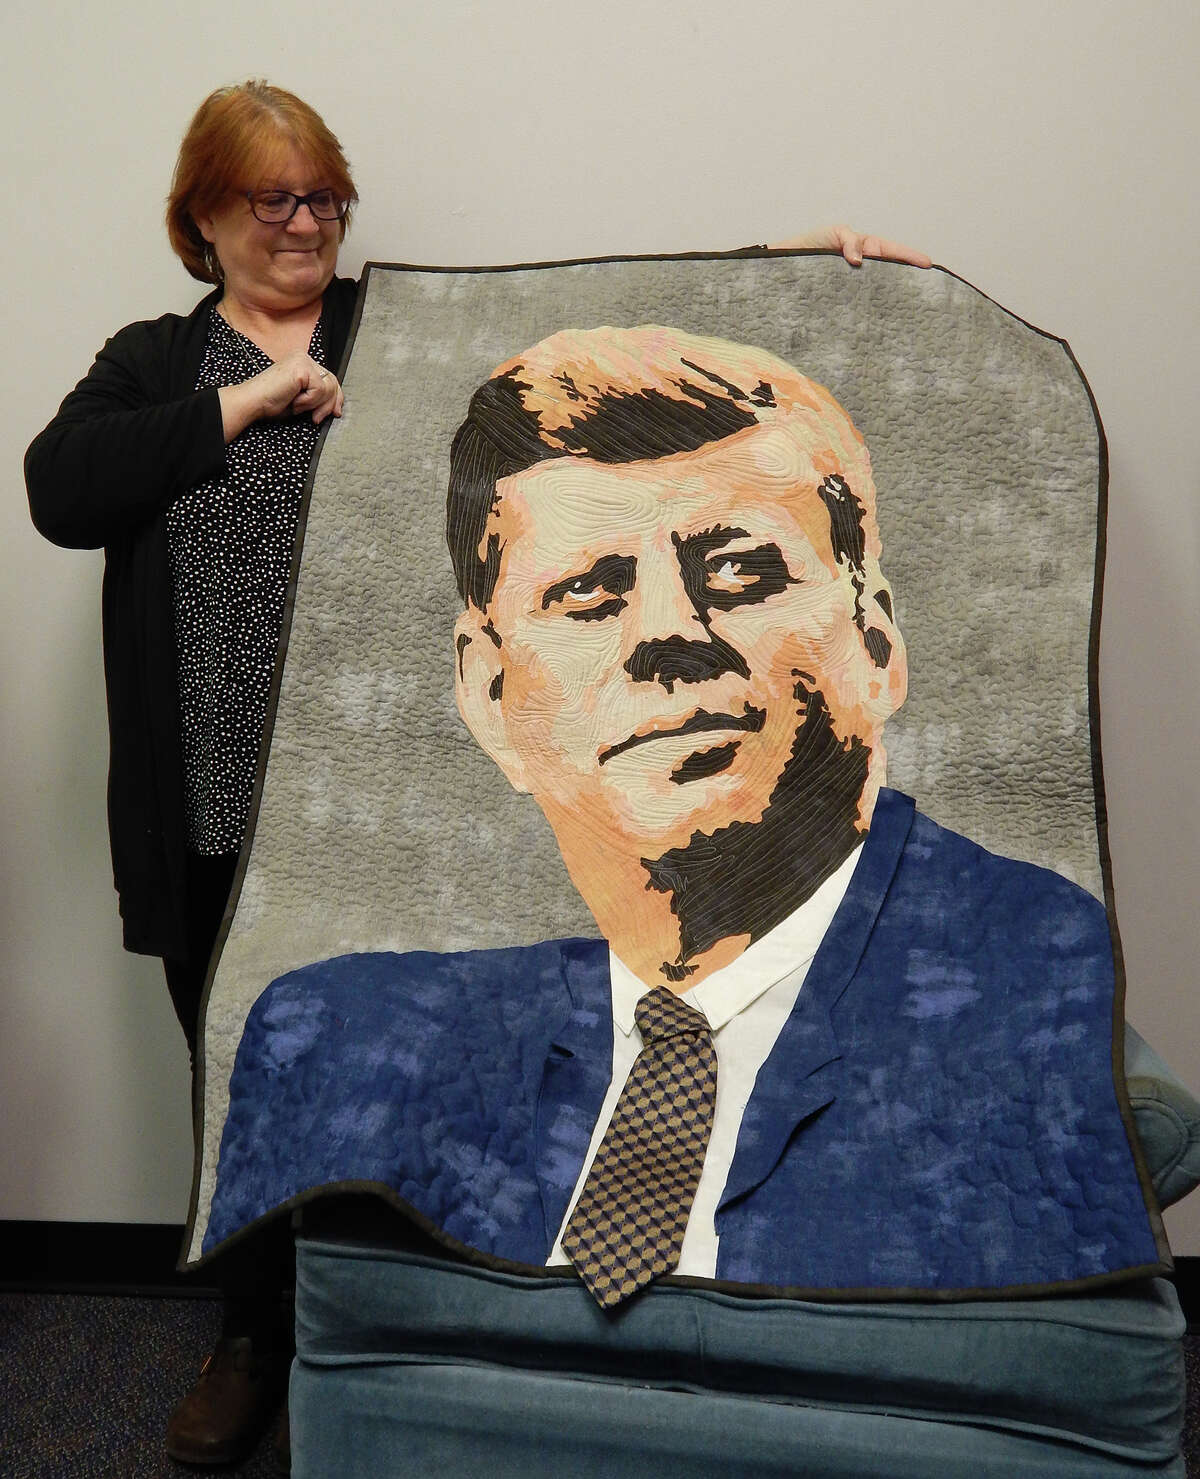 Rosanne Hamilton displays a photo quilt featuring a likeness of John F. Kennedy. The quilt has been accepted into the American Quilter's Society show in March in Branson, Missouri.